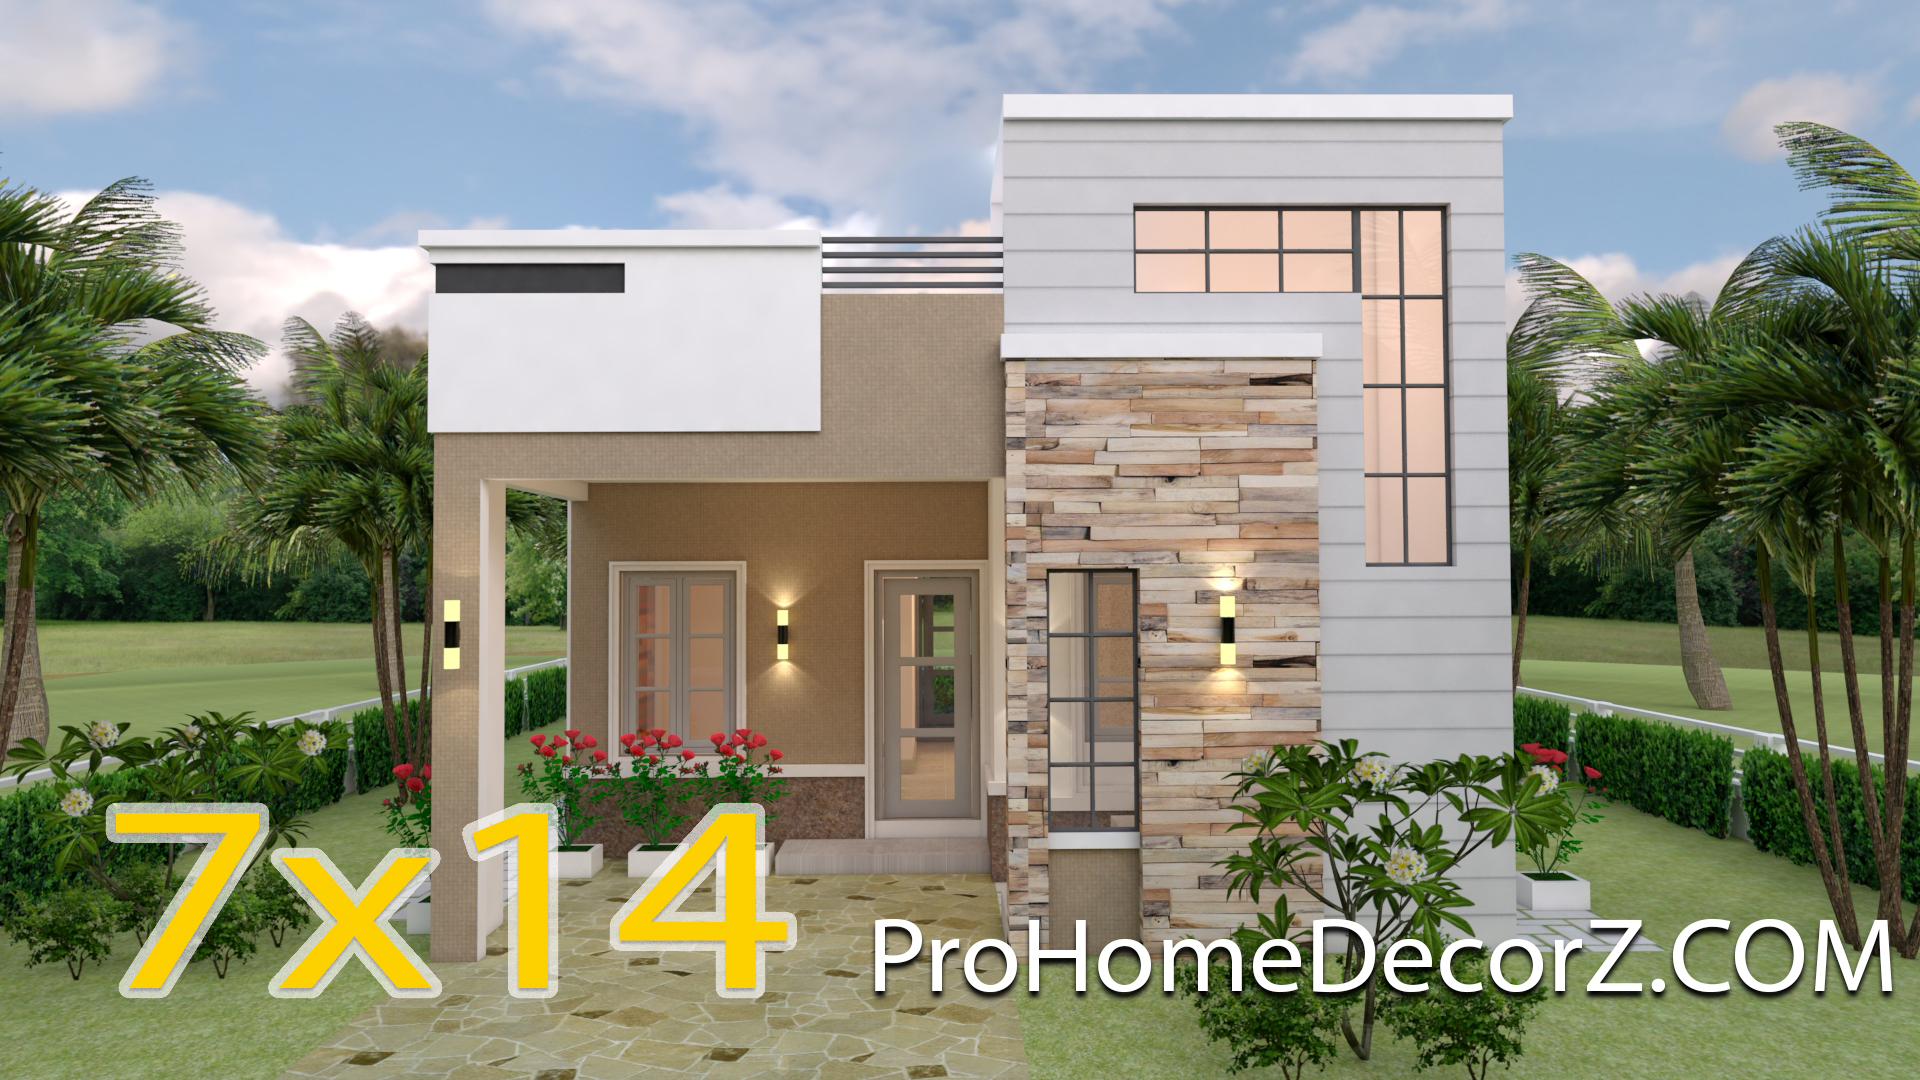 Small Custom Homes 7x14 Meter 23x46 3 Beds Pro Home Decors